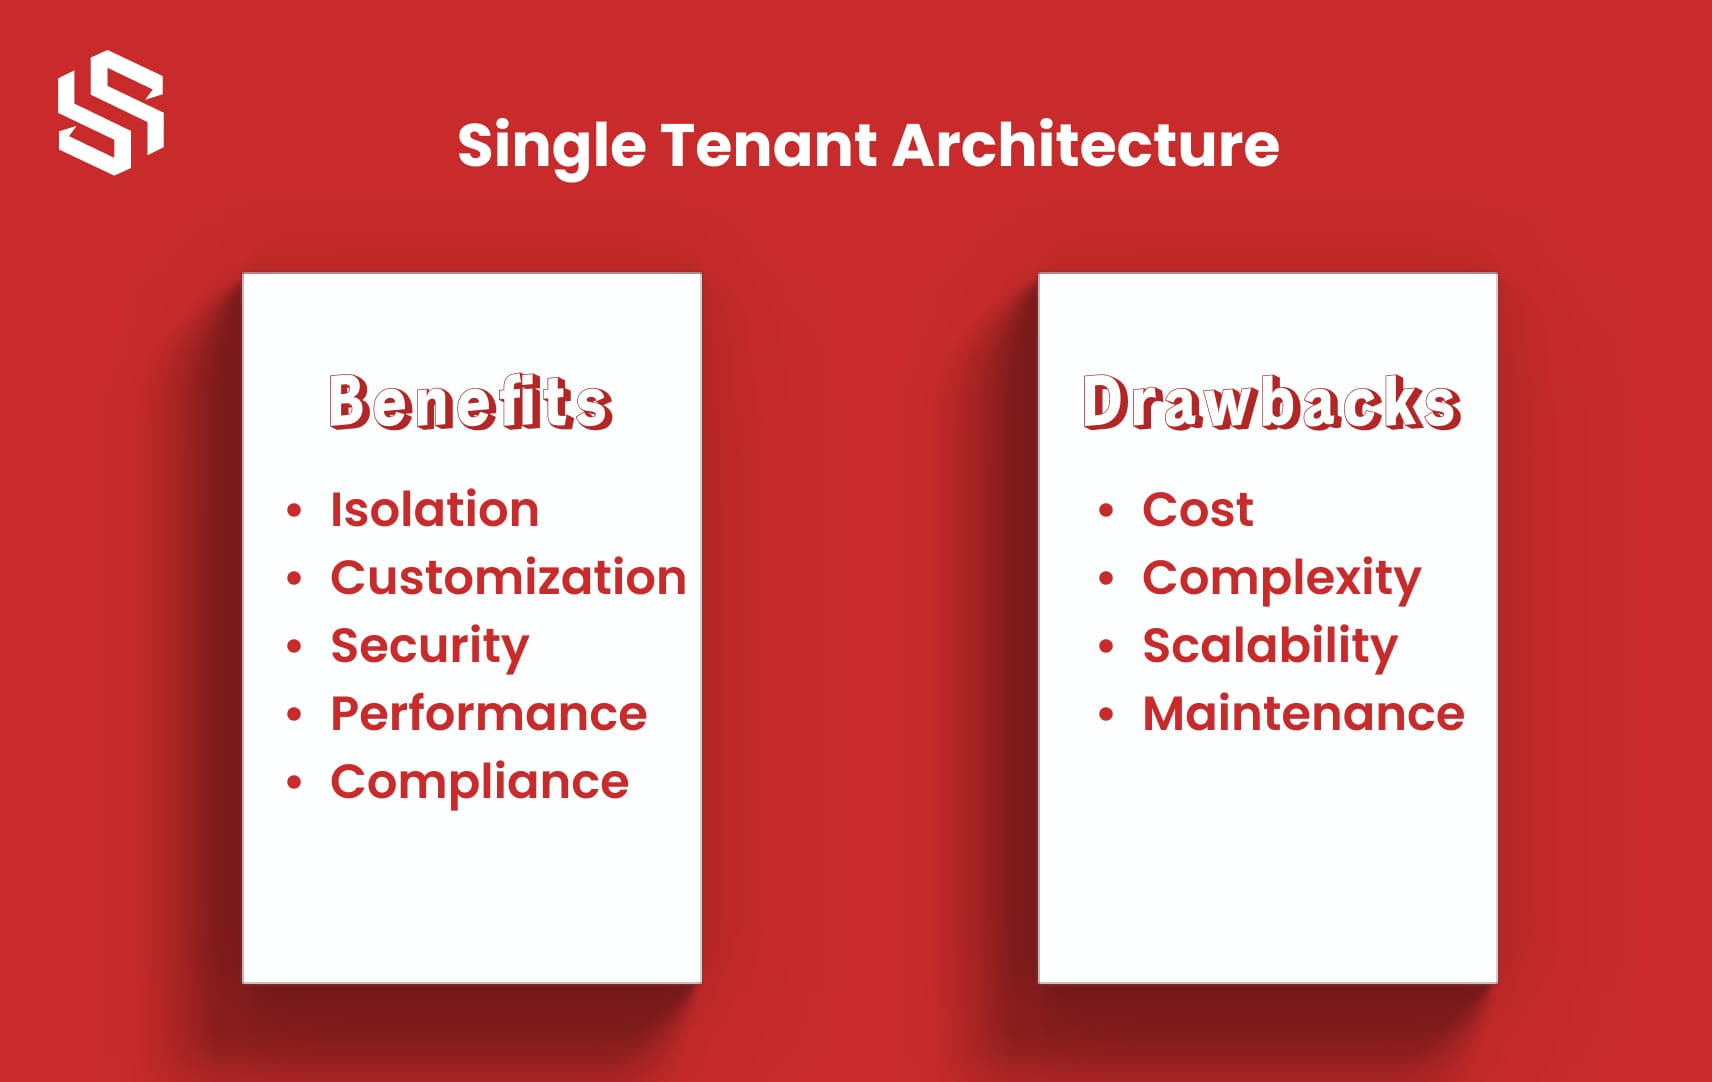 Benefits and Drawbacks of Single Tenant Architecture